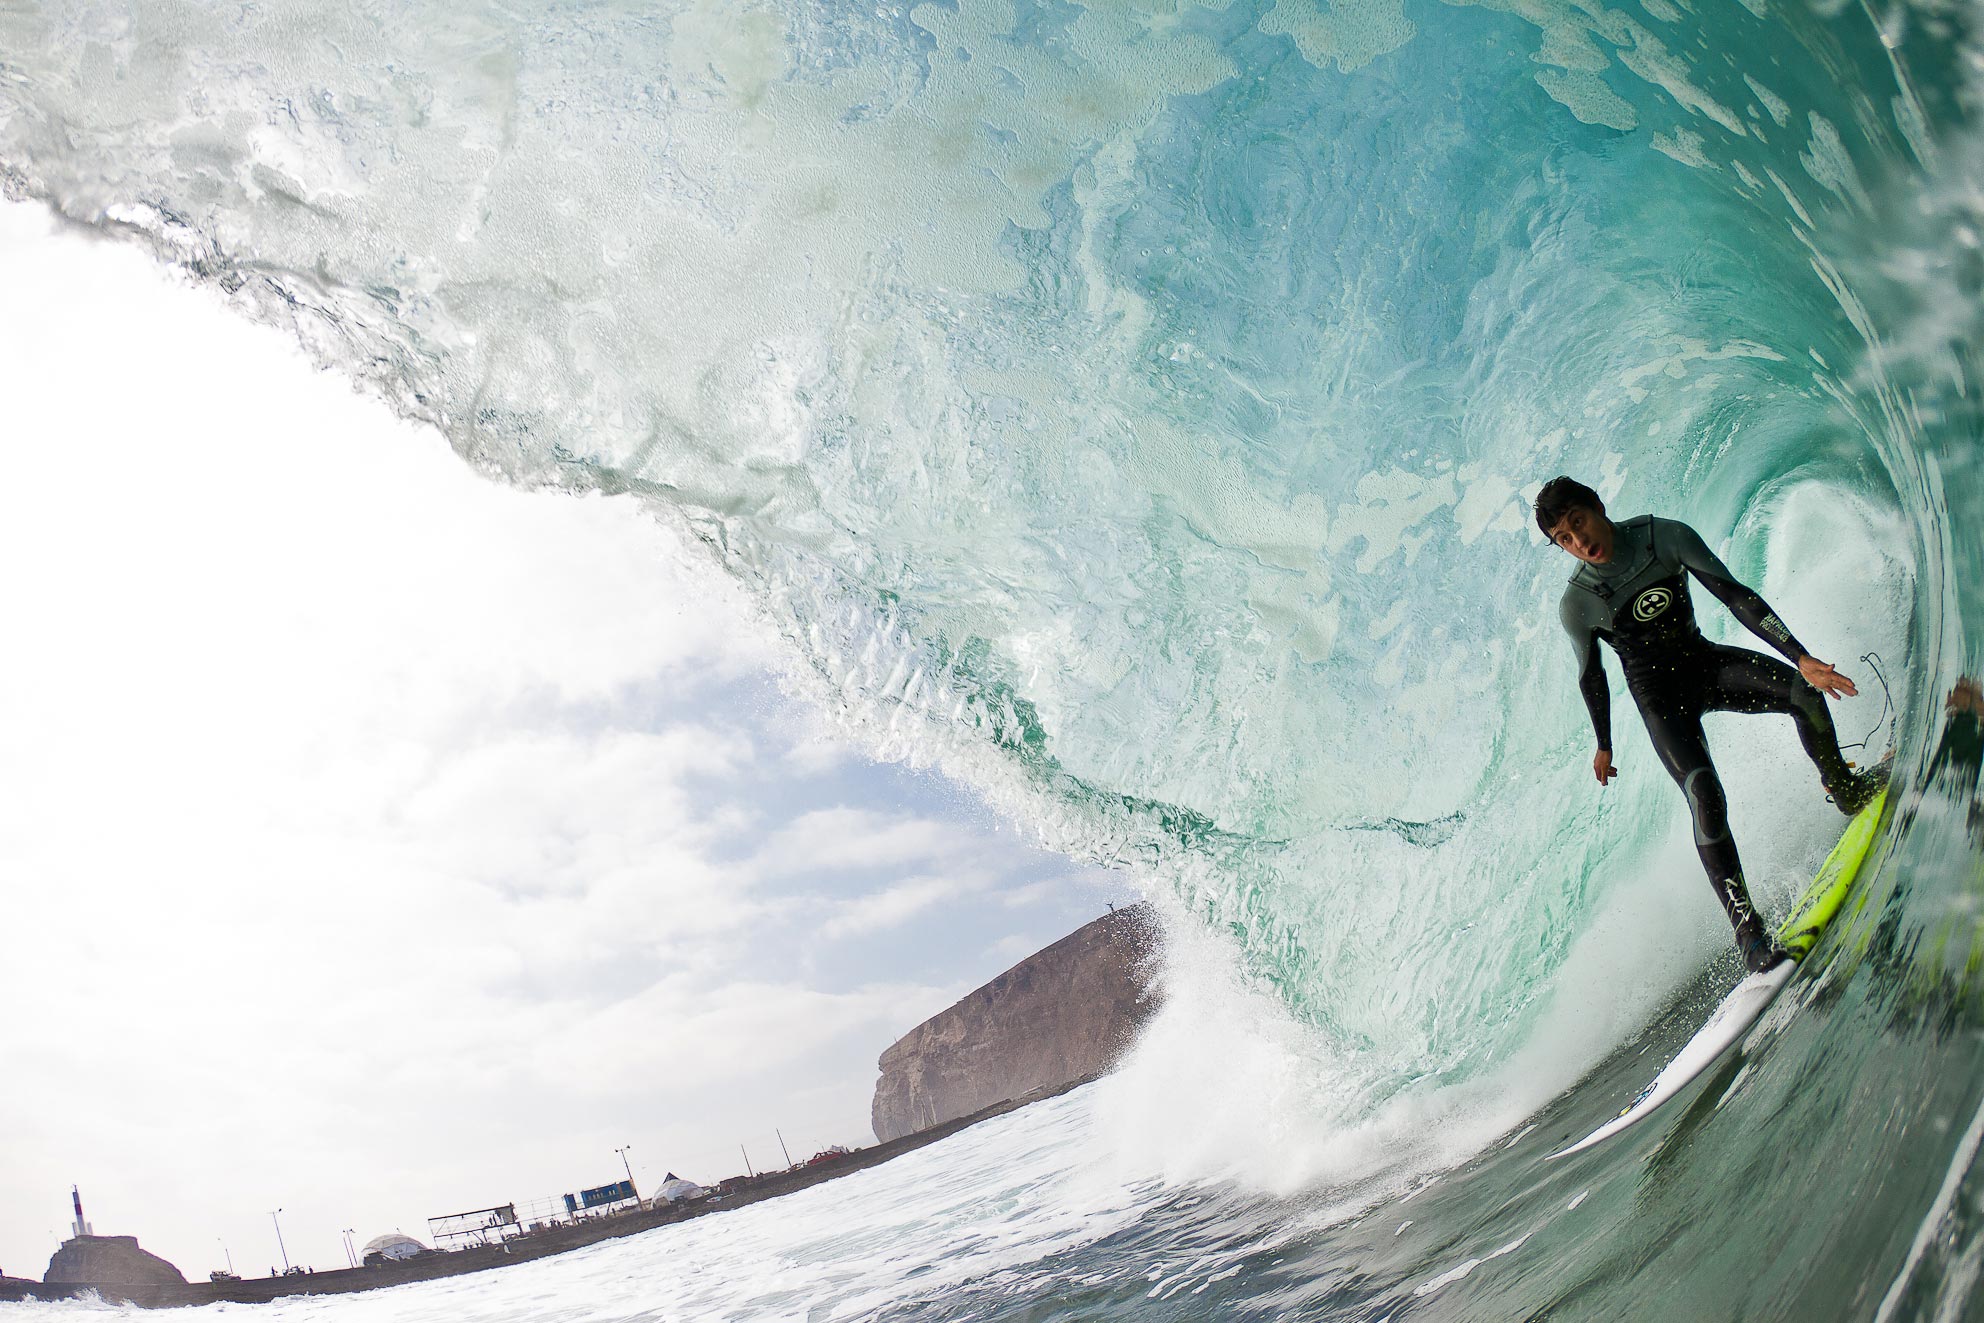 Nico Vargas surfing in the wave pipeline